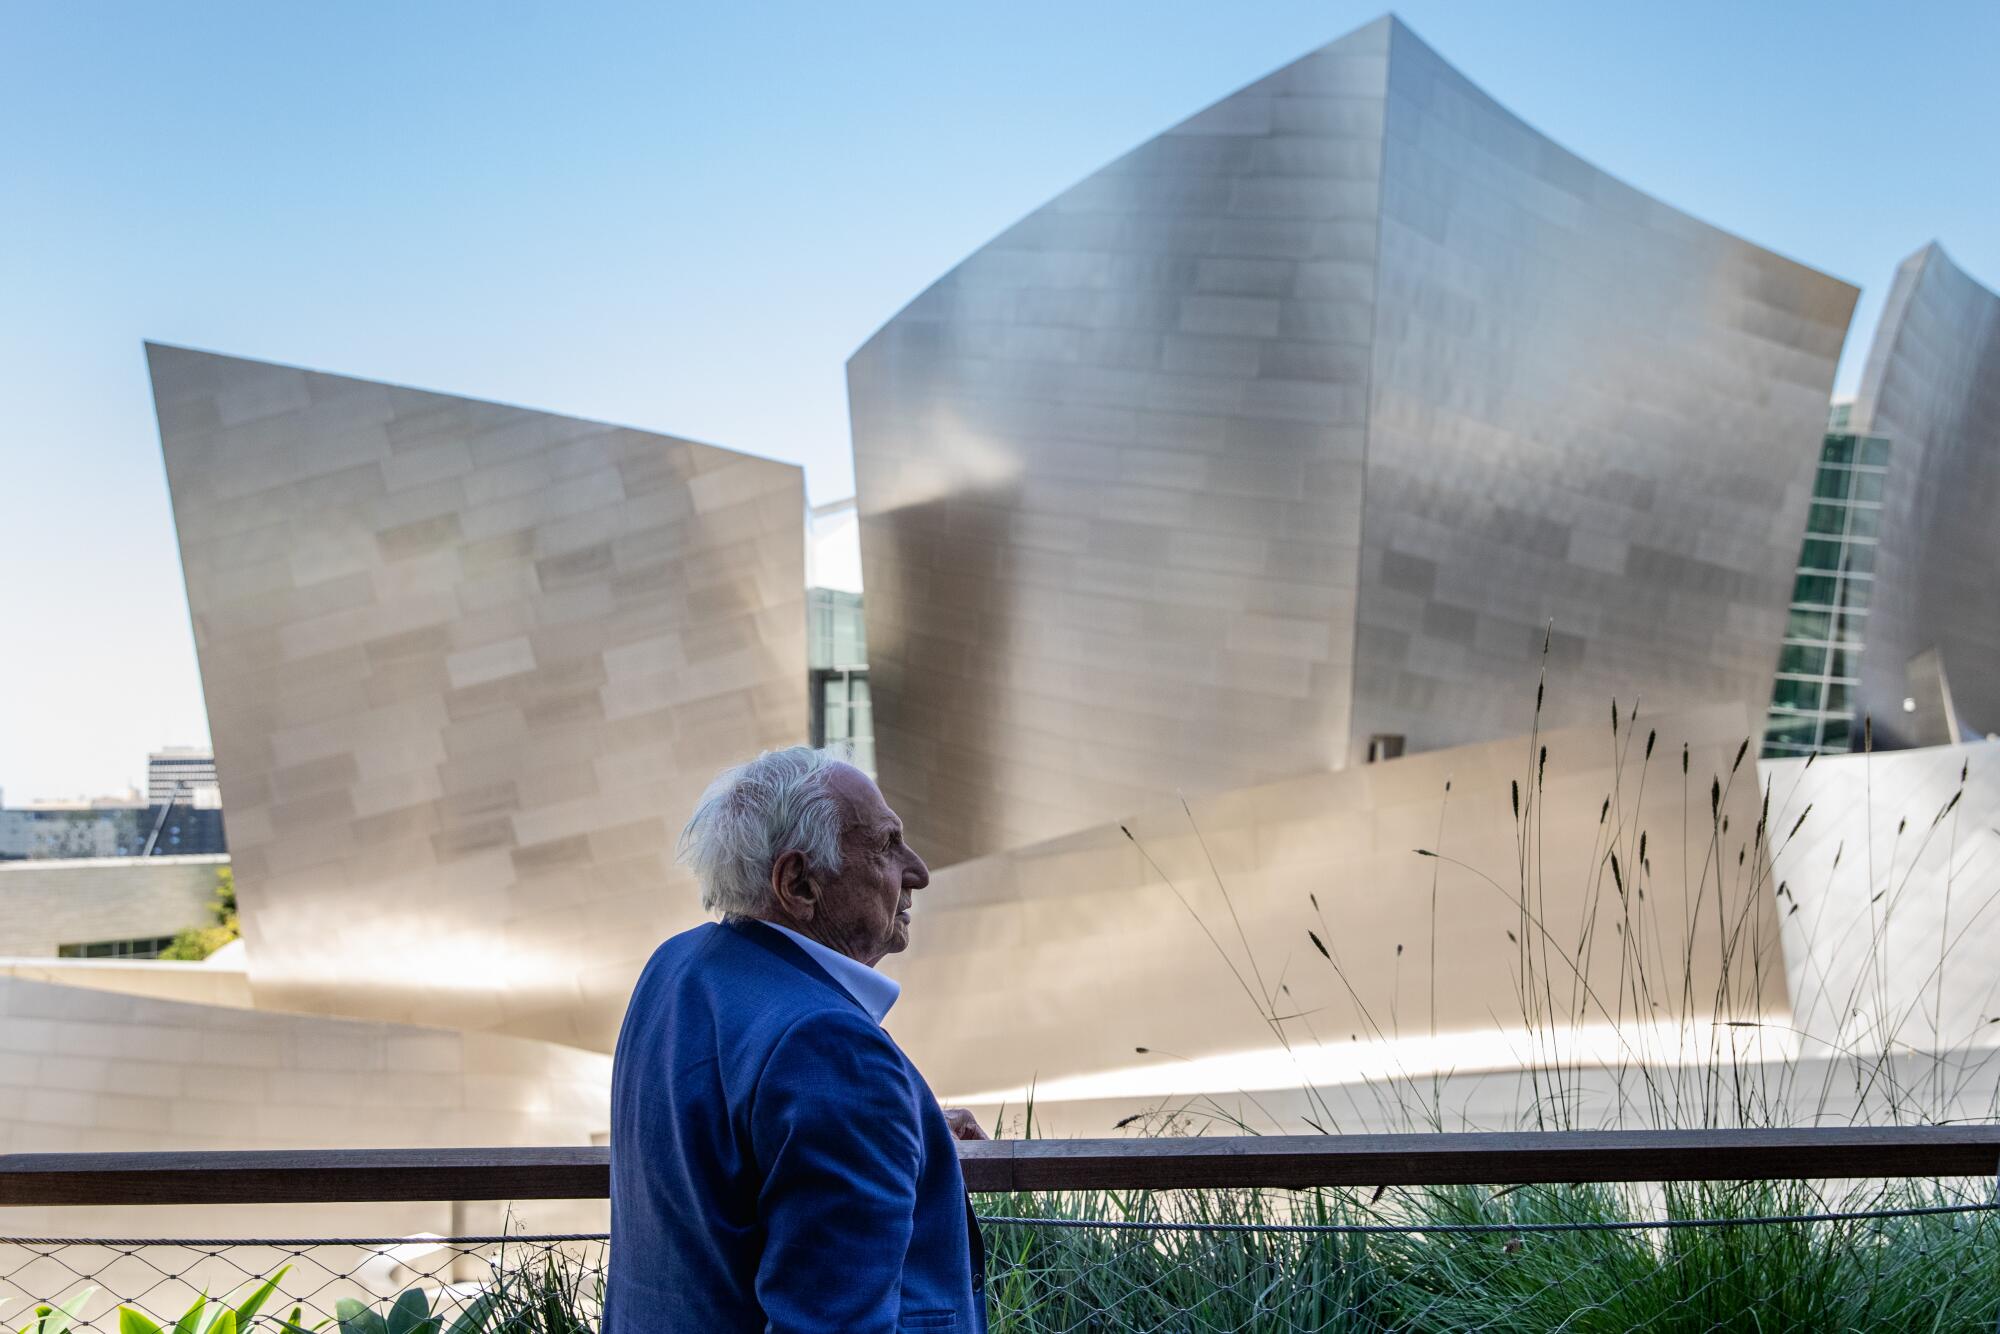 Architect Frank Gehry in an outdoor lounge area of the bar, part of the Grand LA development.